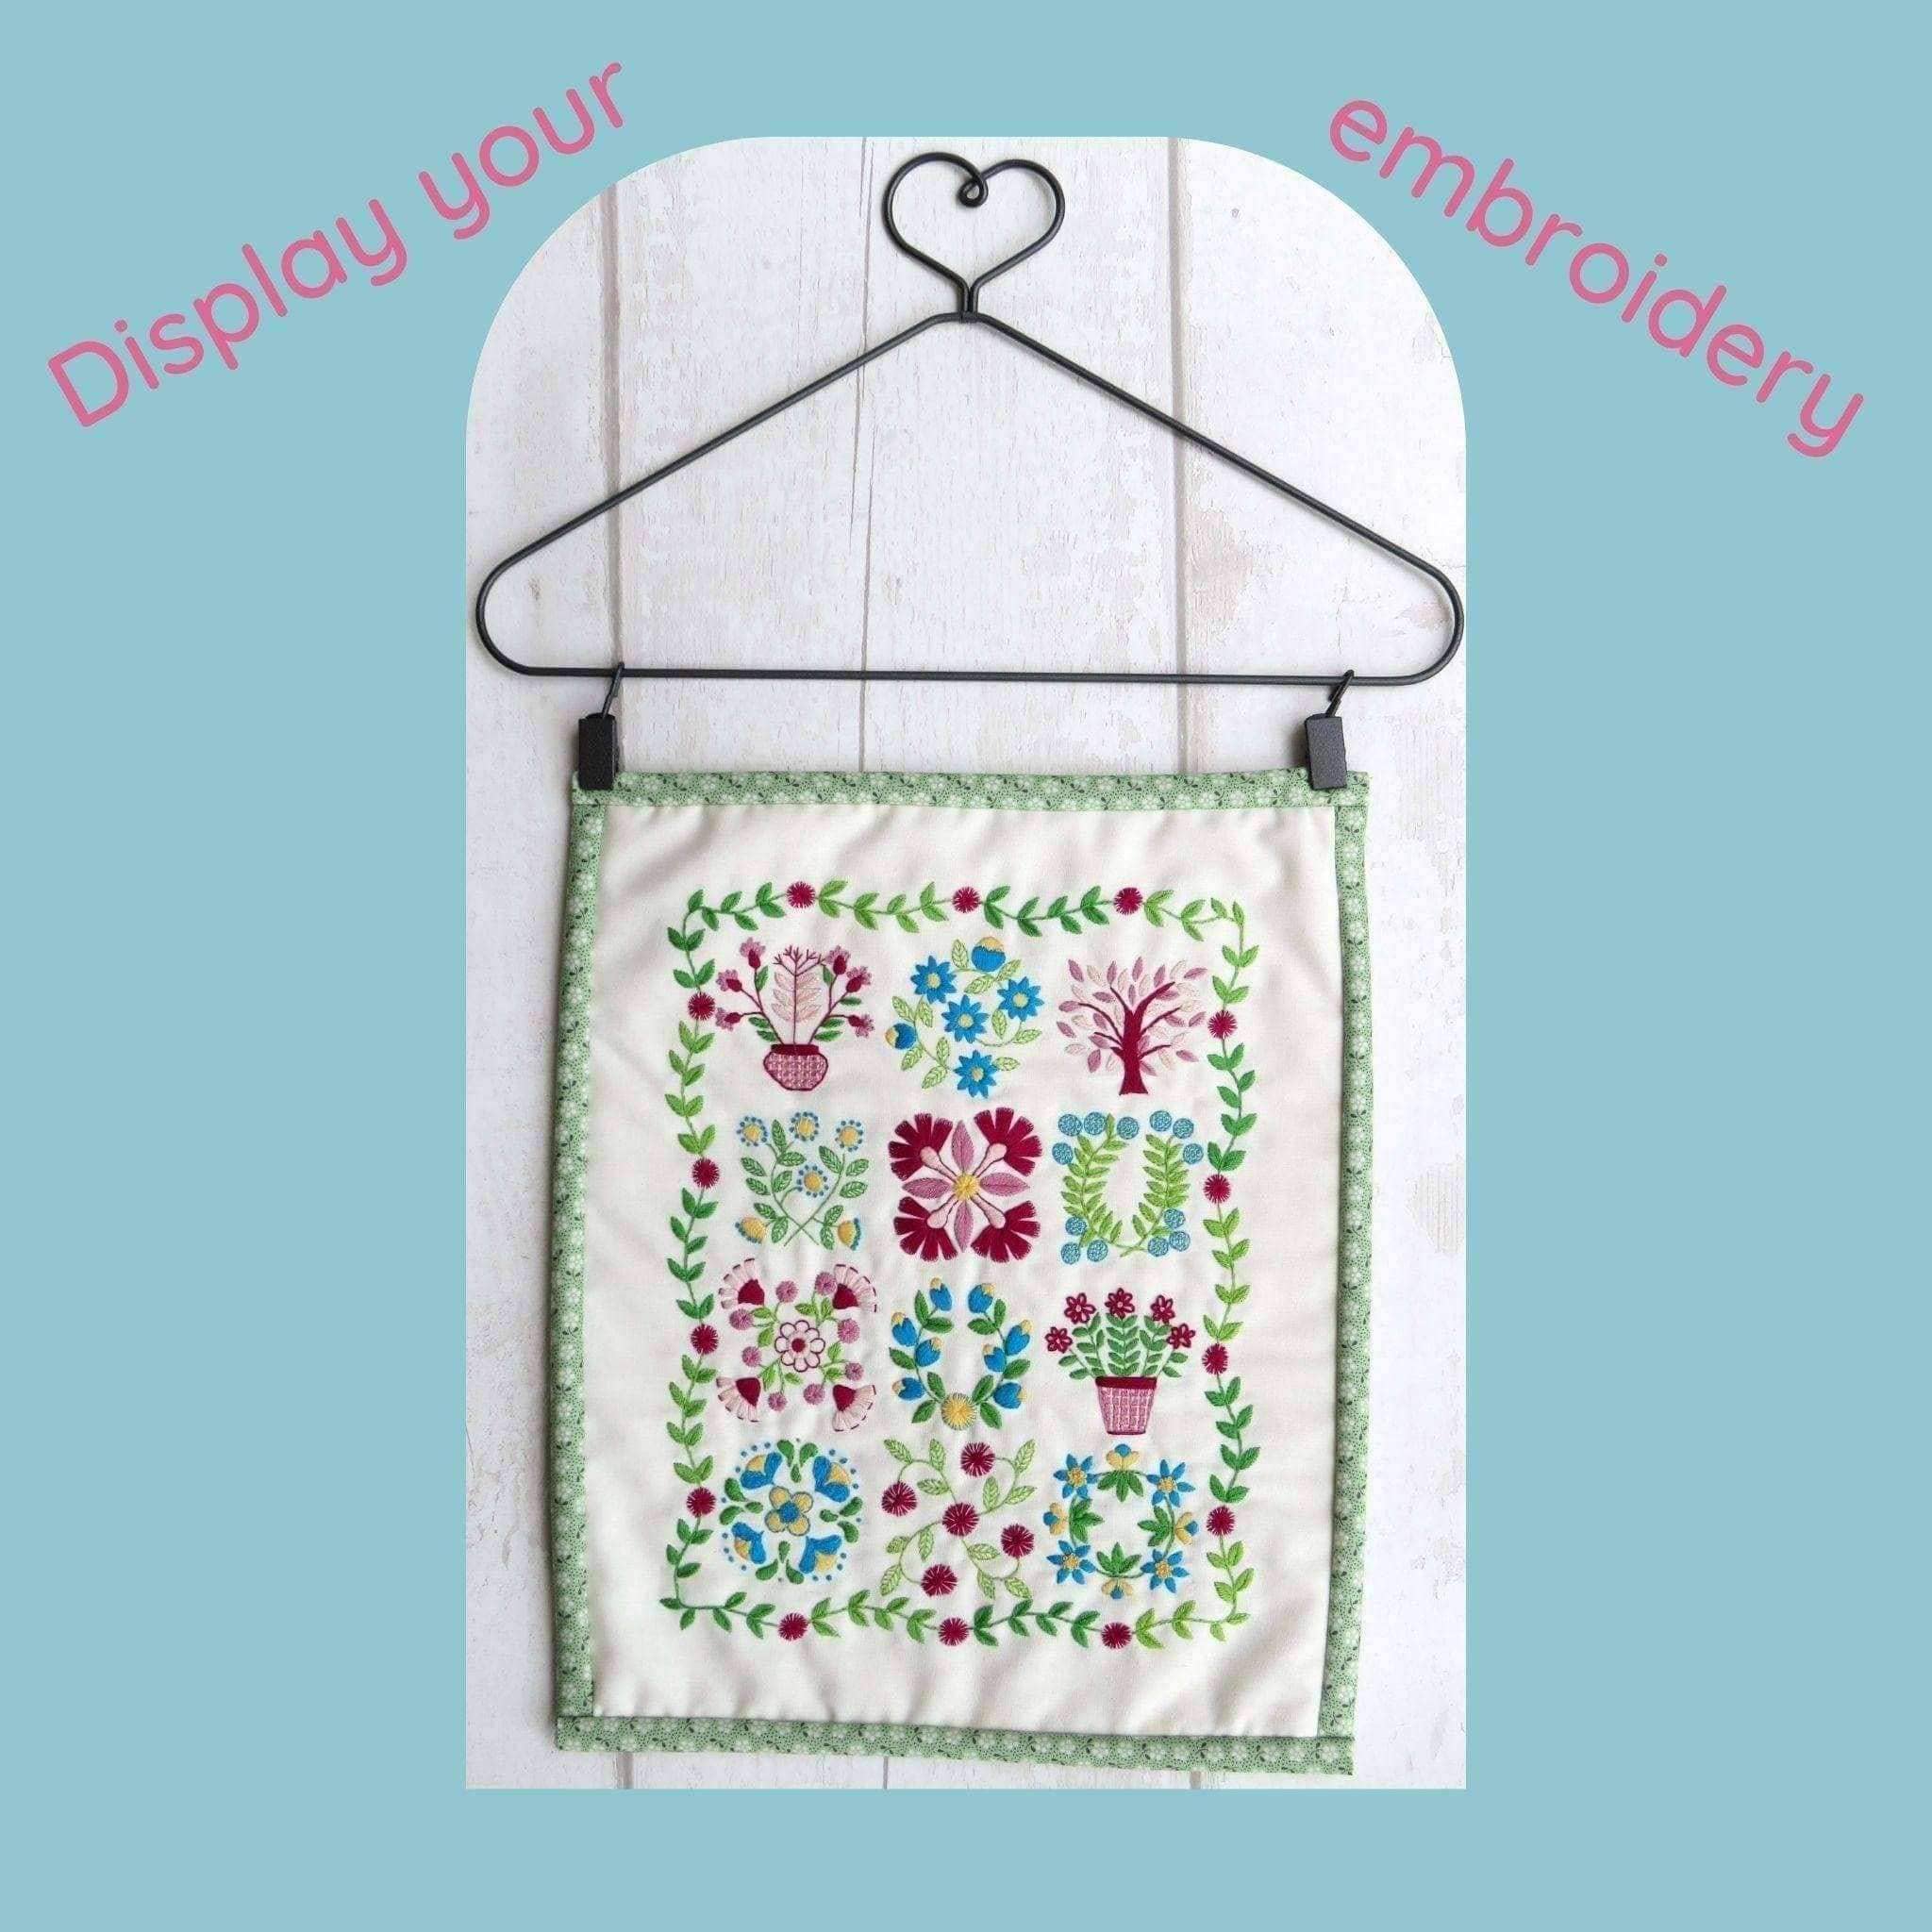 Embroidery Display 